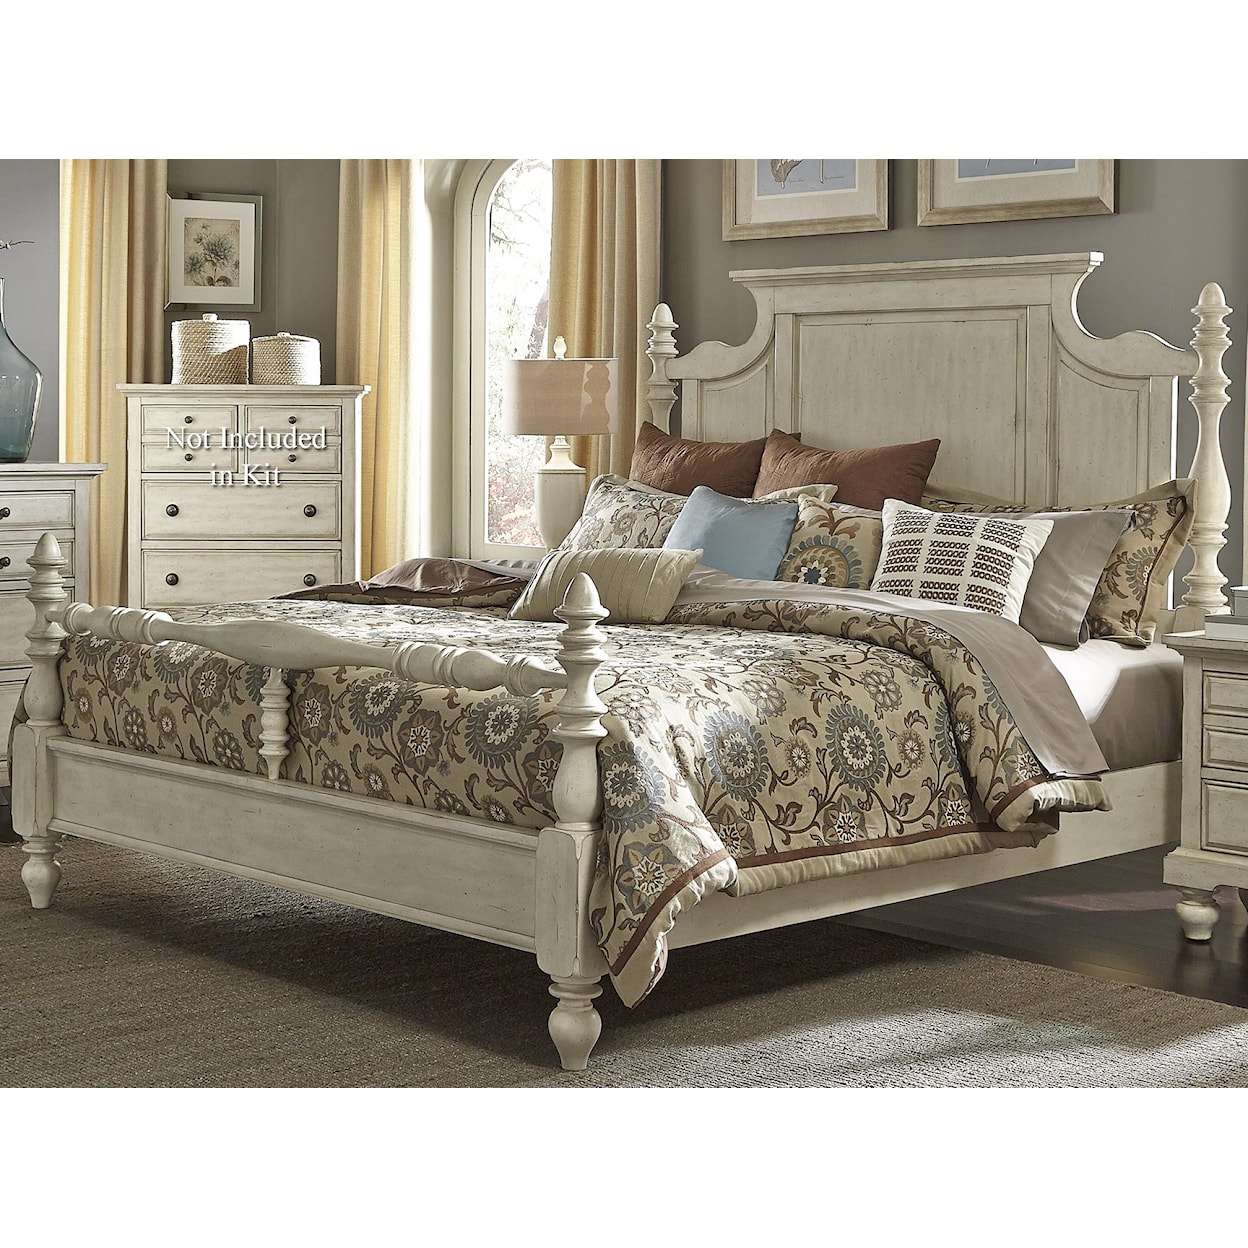 Liberty Furniture High Country 797 King Poster Bed